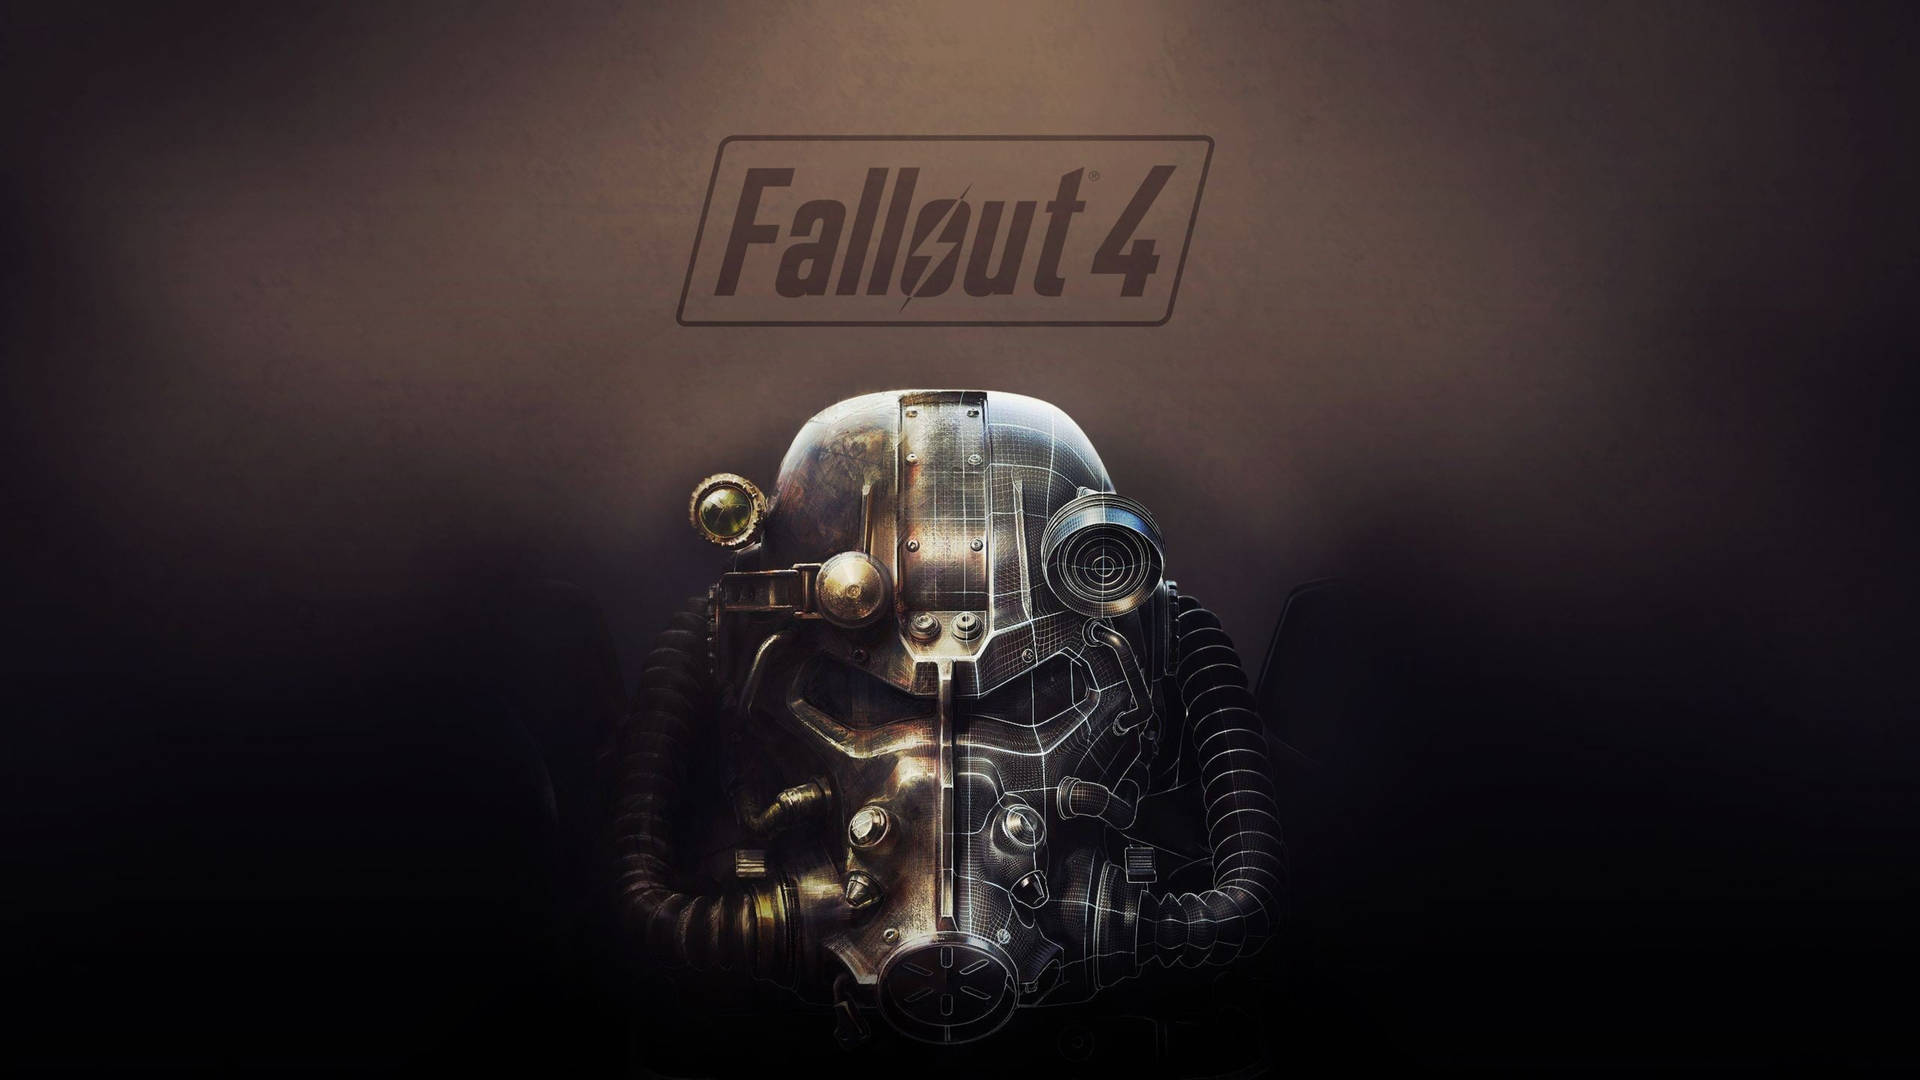 200+] Fallout Wallpapers | Wallpapers.com